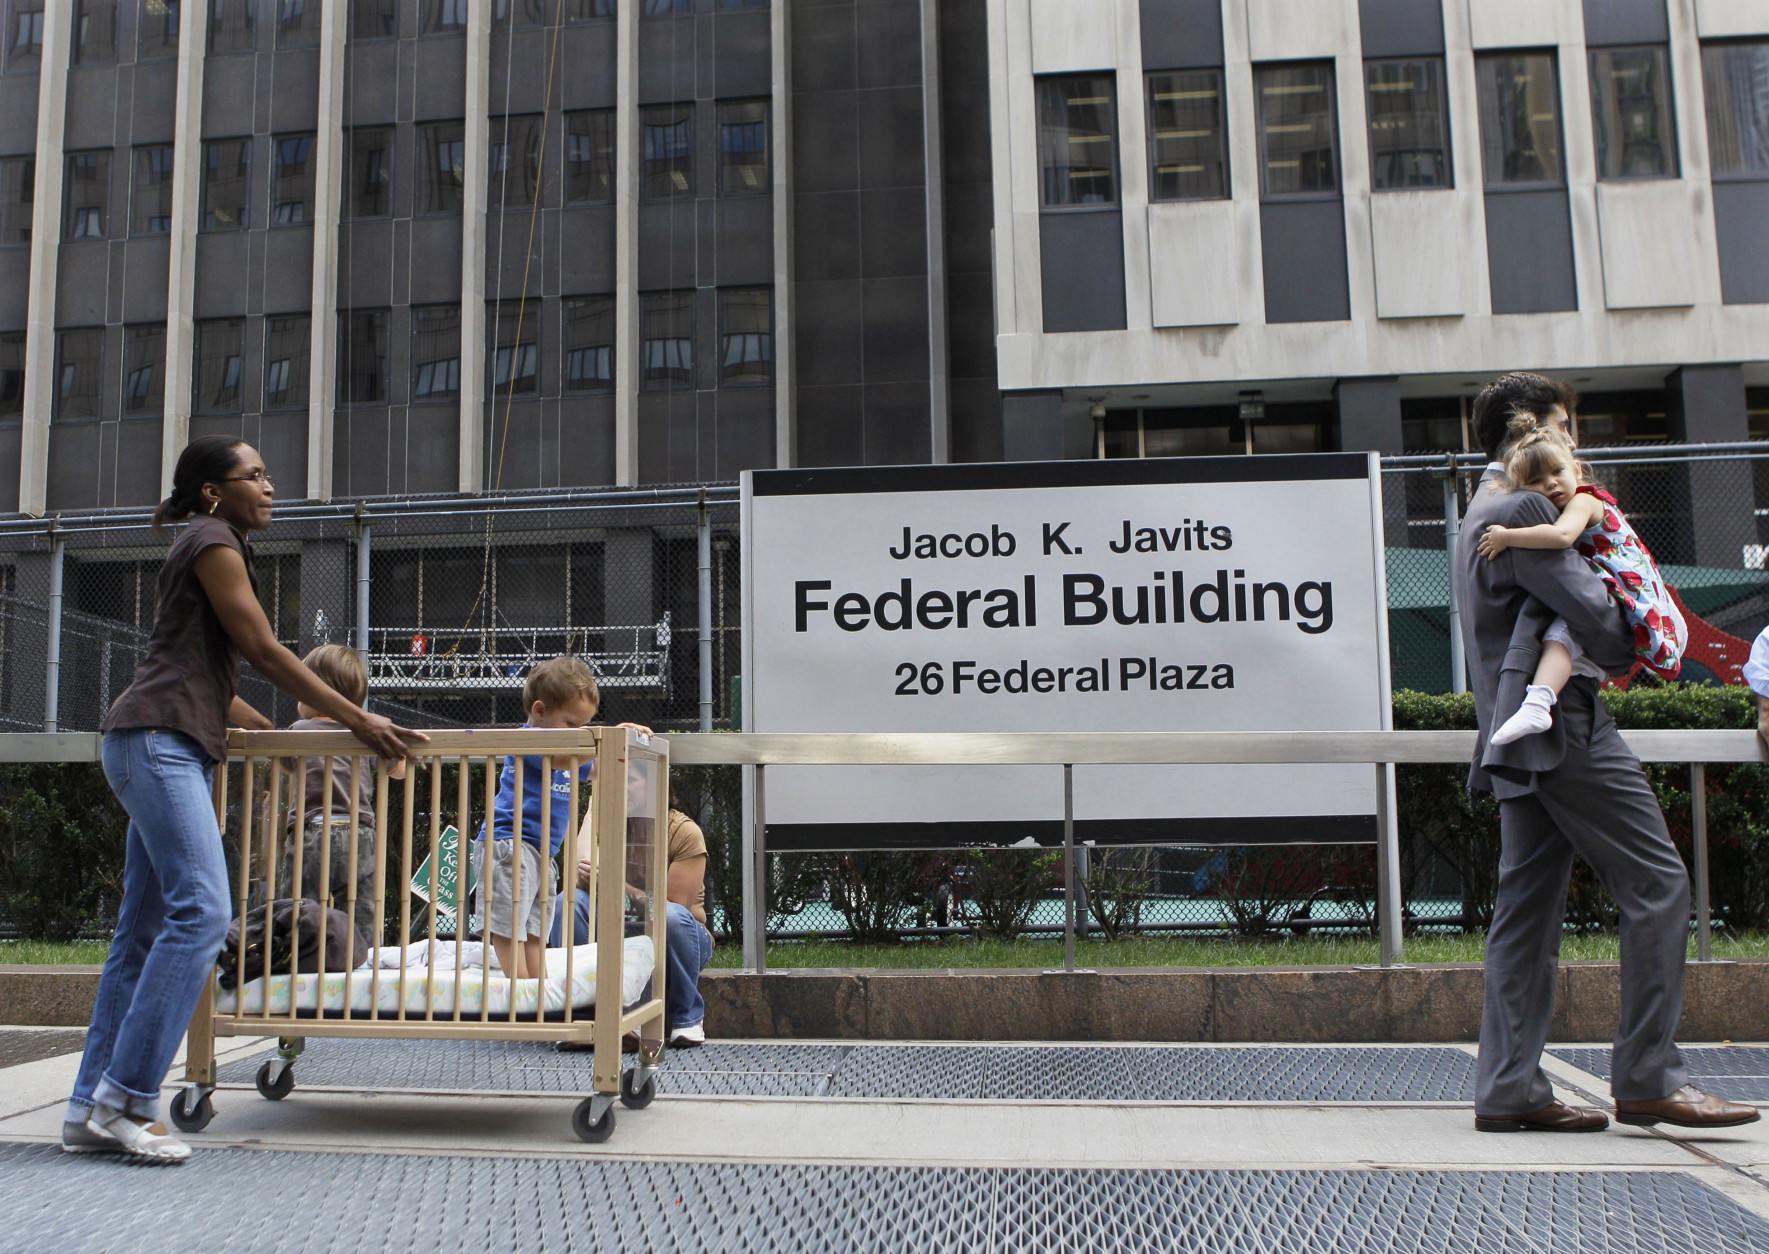 Children are evacuated from the Jacob K. Javits Federal building in New York on Tuesday, Aug. 23, 2011 after an earthquake centered northwest of Richmond, Va. was felt. (AP Photo/Mary Altaffer)